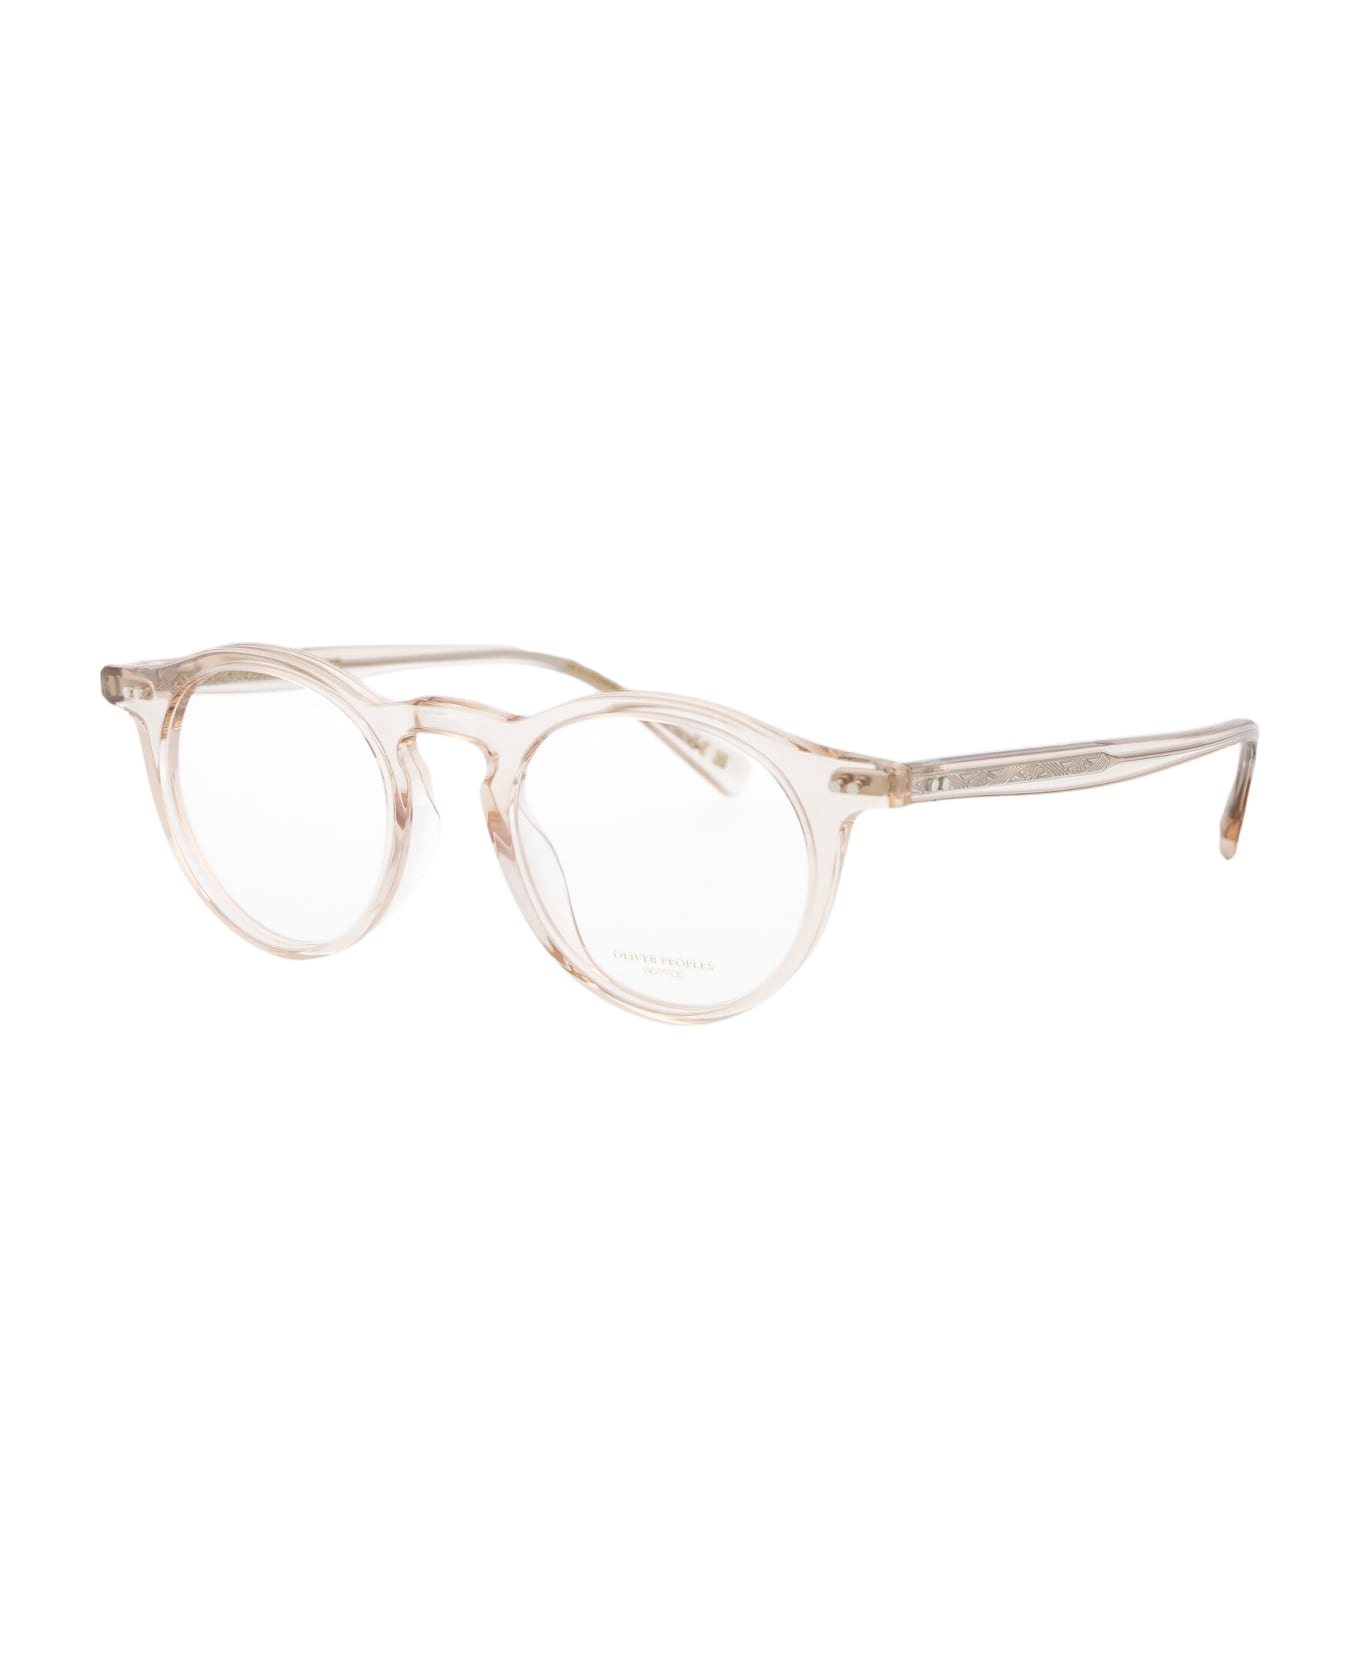 Oliver Peoples Op-13 Glasses - 1743 Cherry Blossom アイウェア